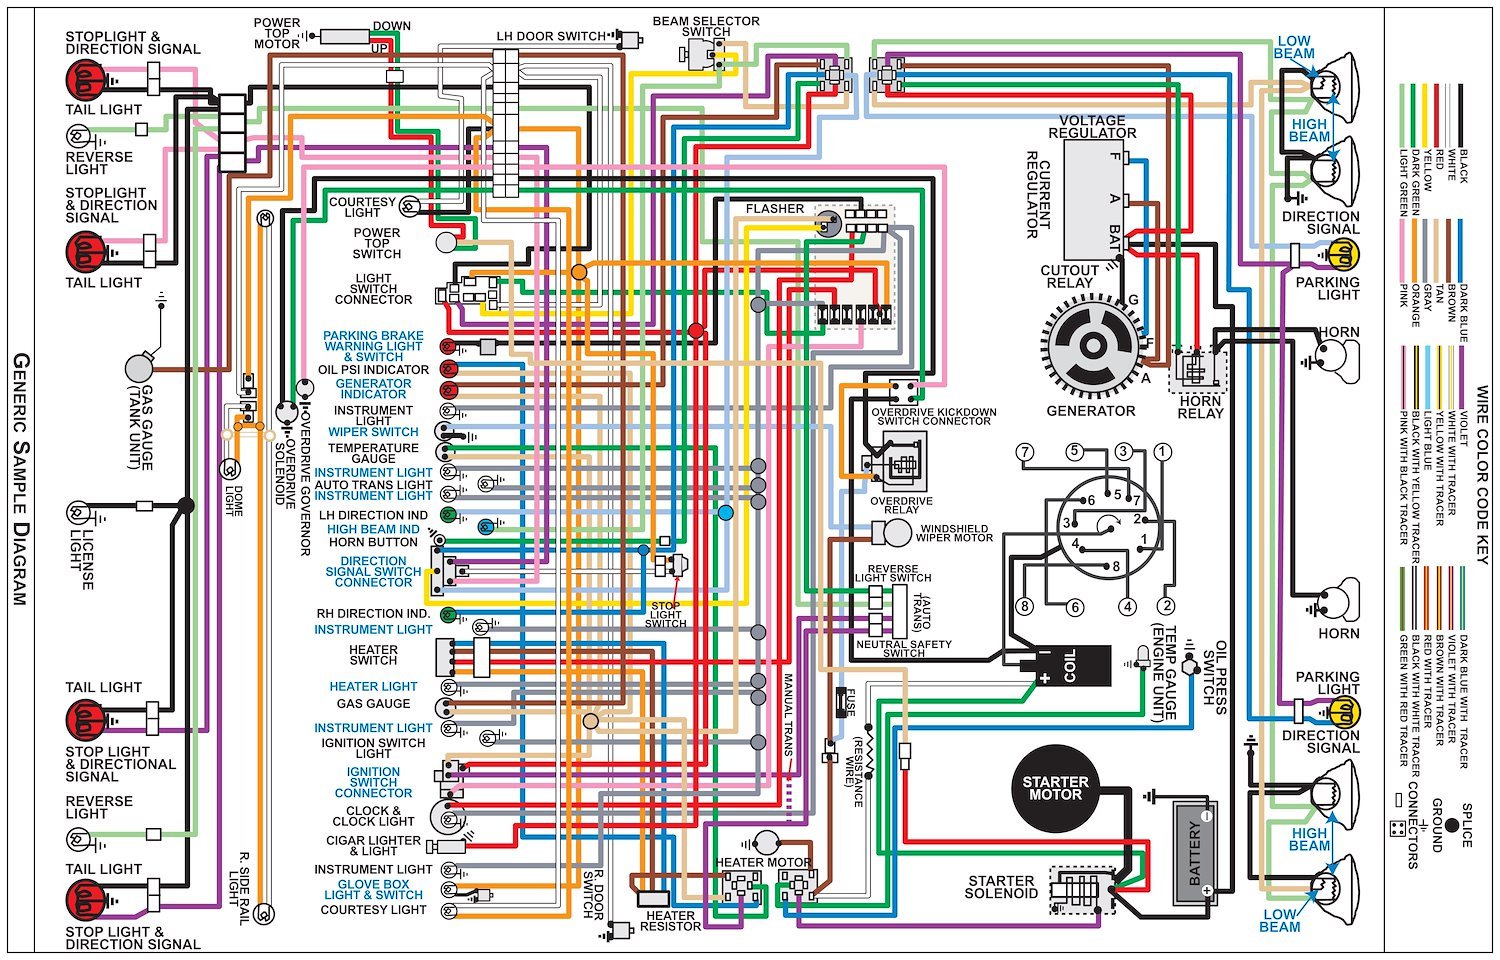 Wiring Diagram for 1967 Dodge Charger, 11 in x 17 in., Laminated